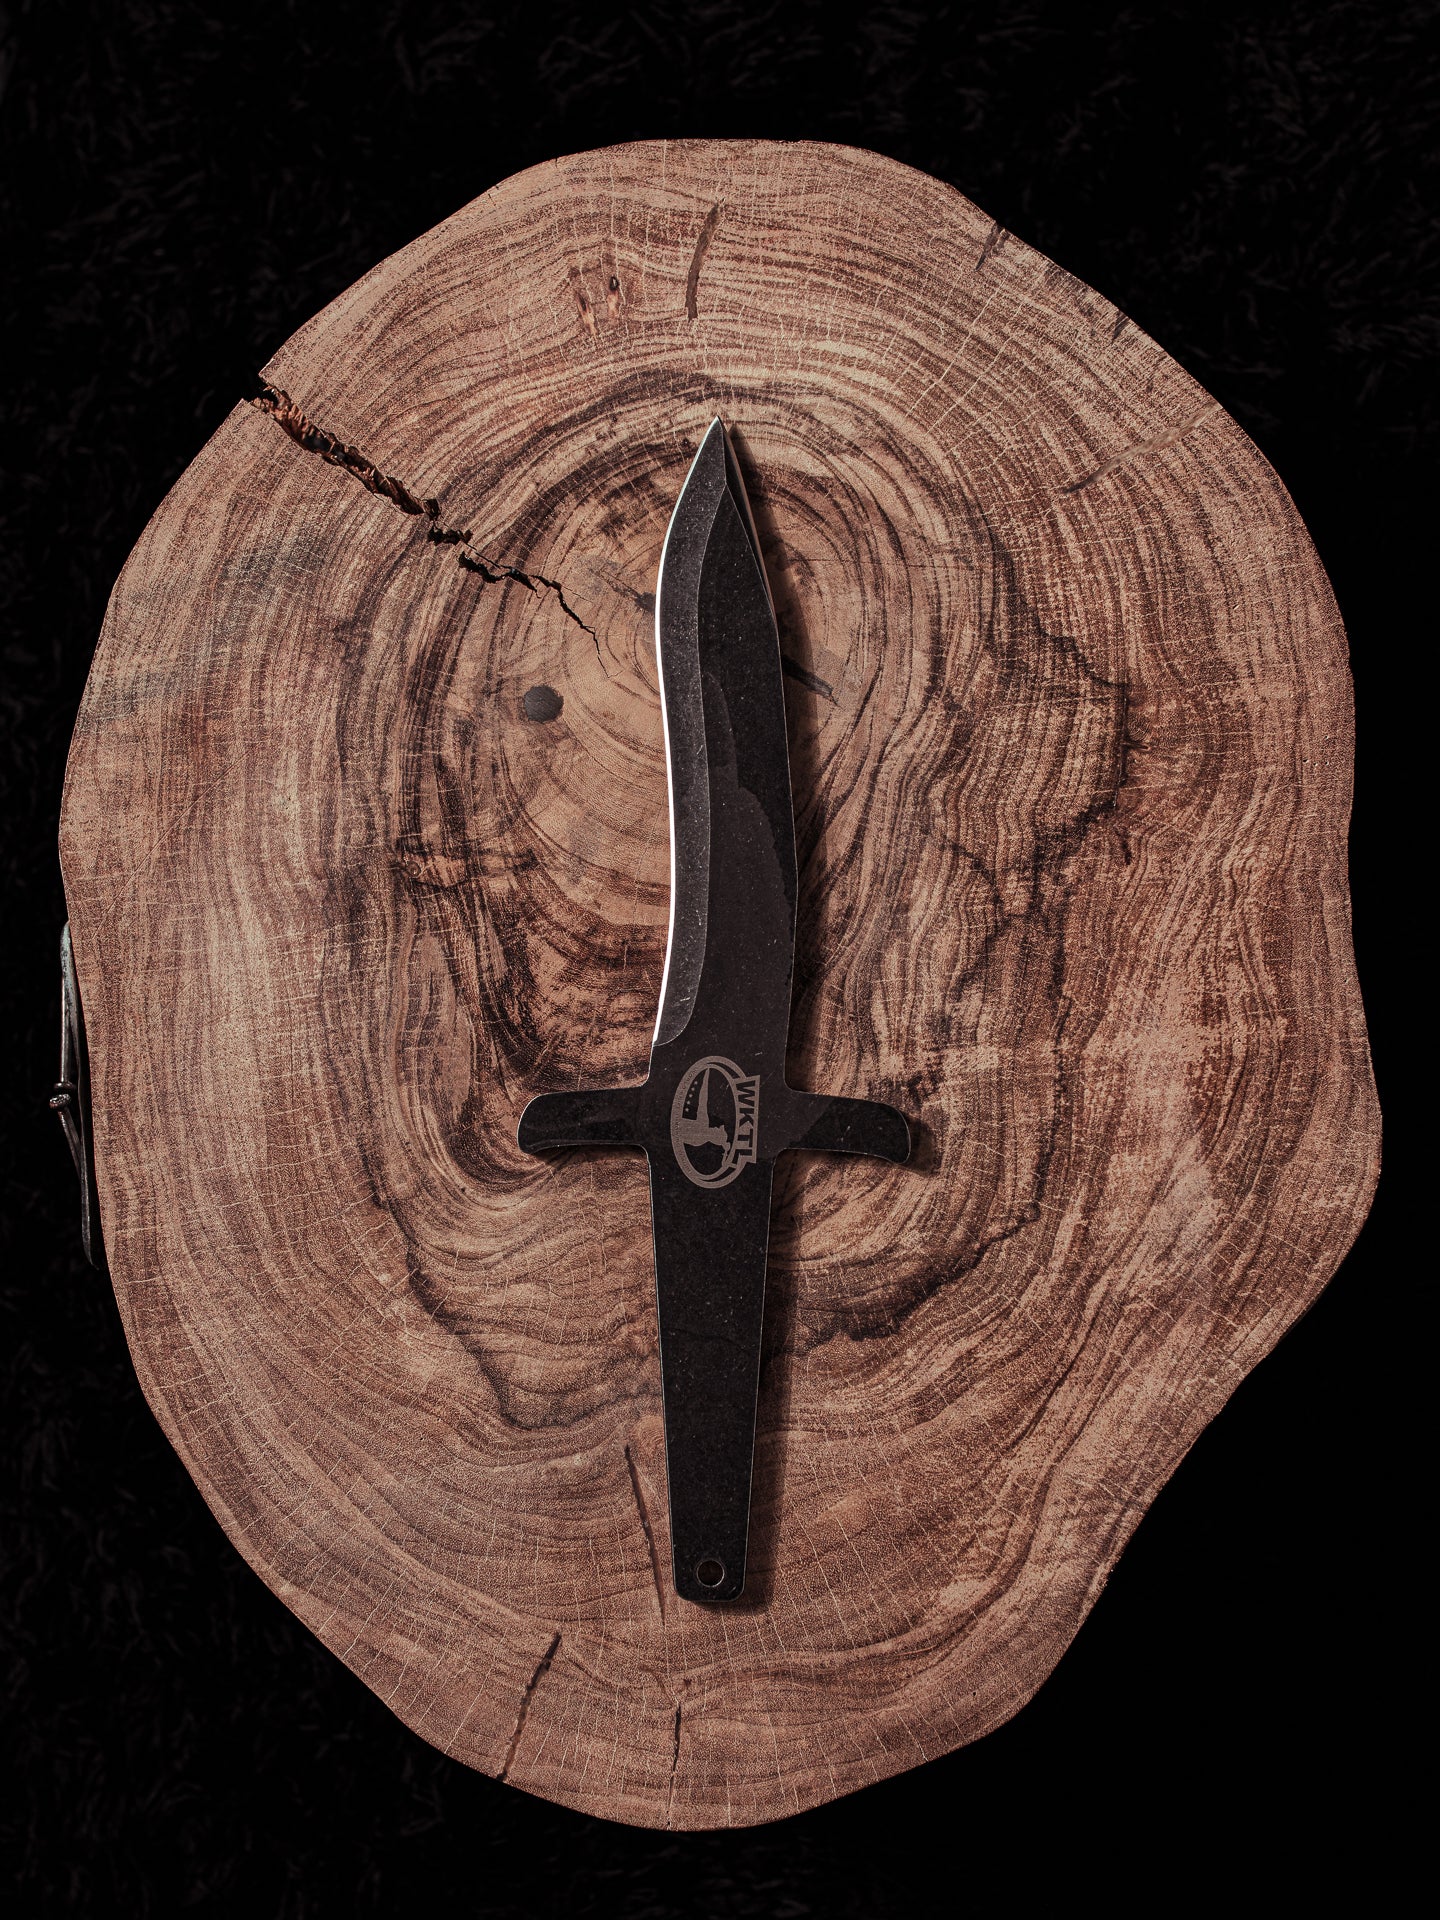 World Knife Throwing League (WKTL) Certified Competition Throwing Knife, The Raptor